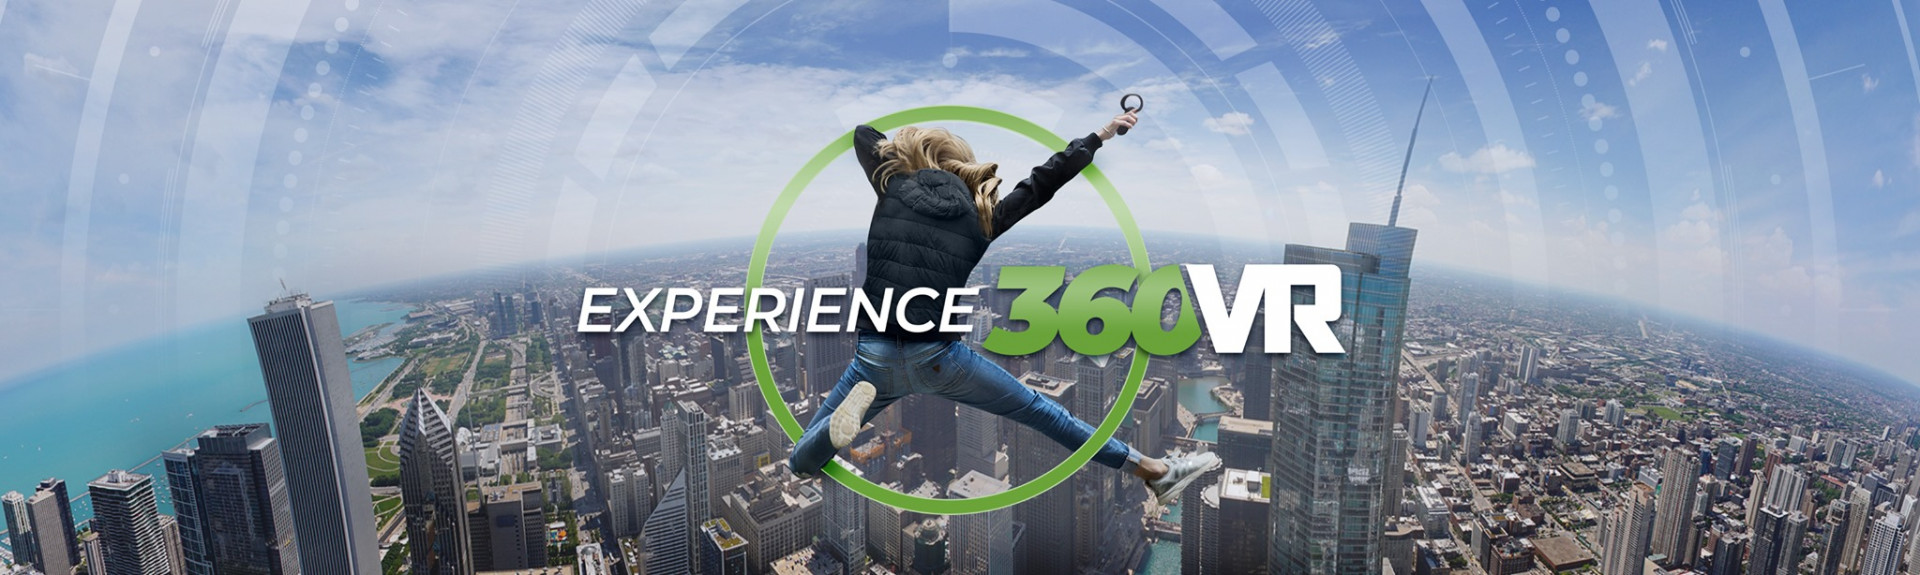 Experience360VR